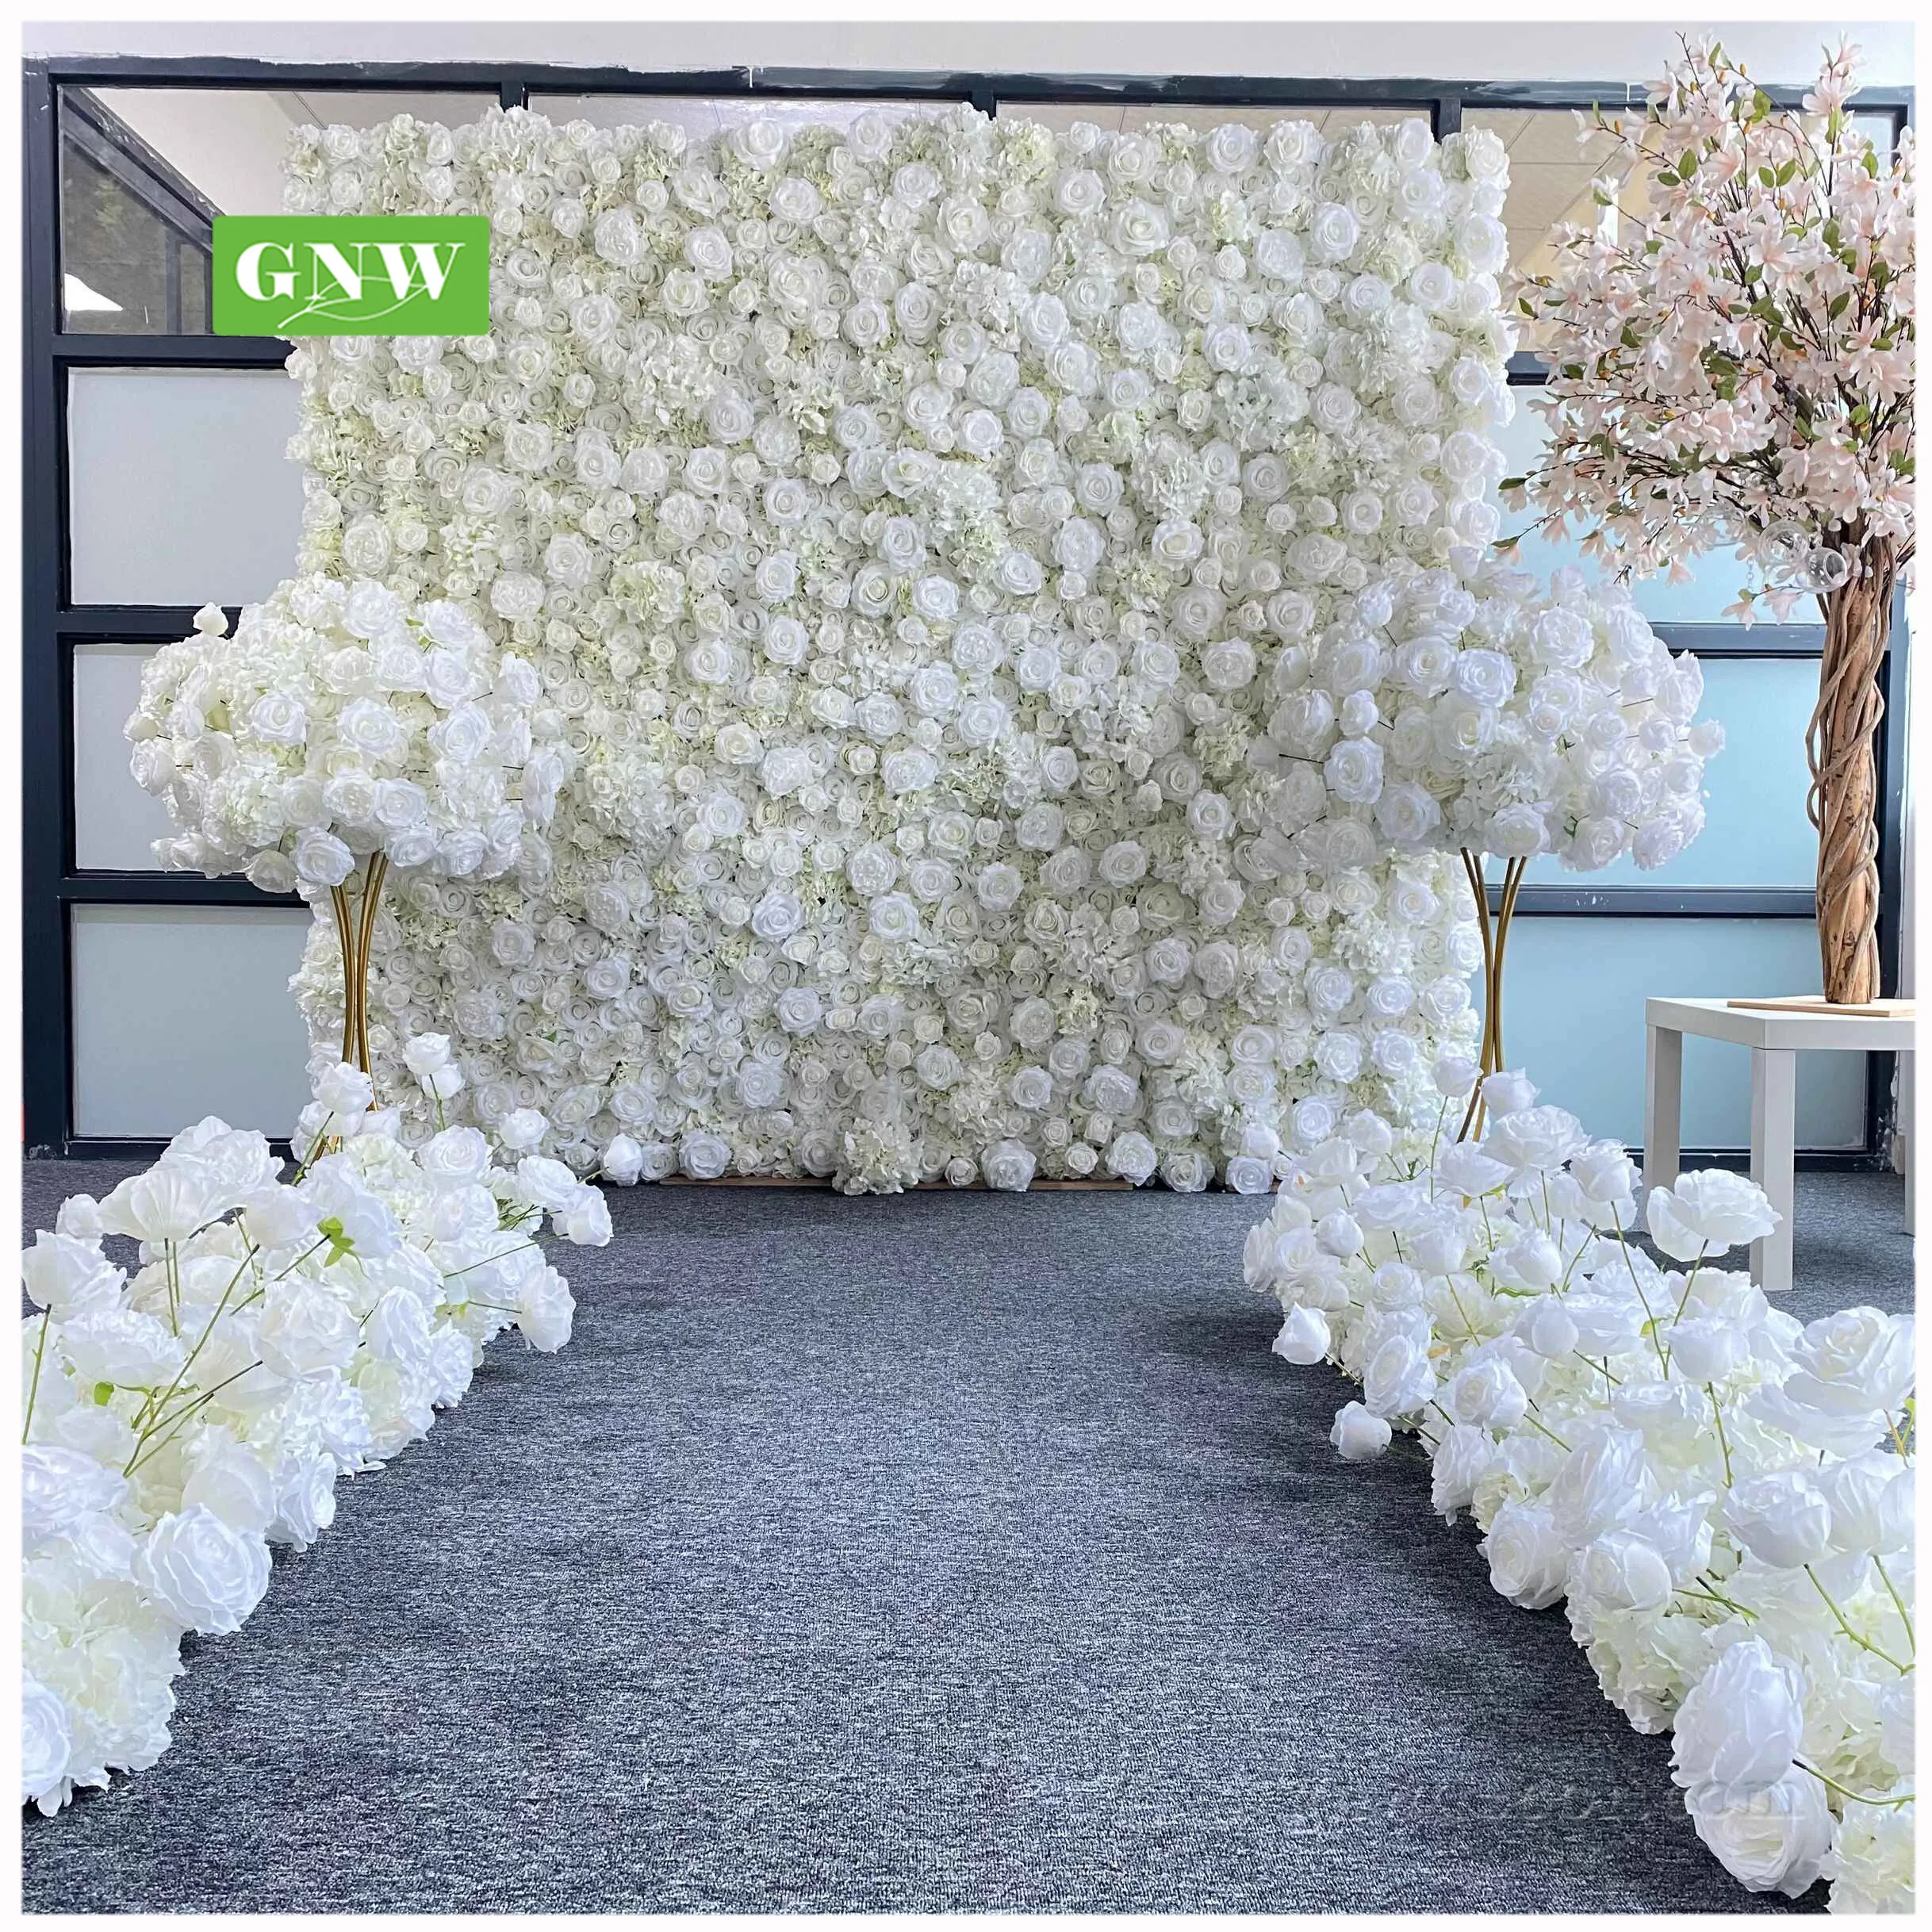 GNW floral wedding backdrop artificial roll up wall decoration backdrop curtain for wedding event party